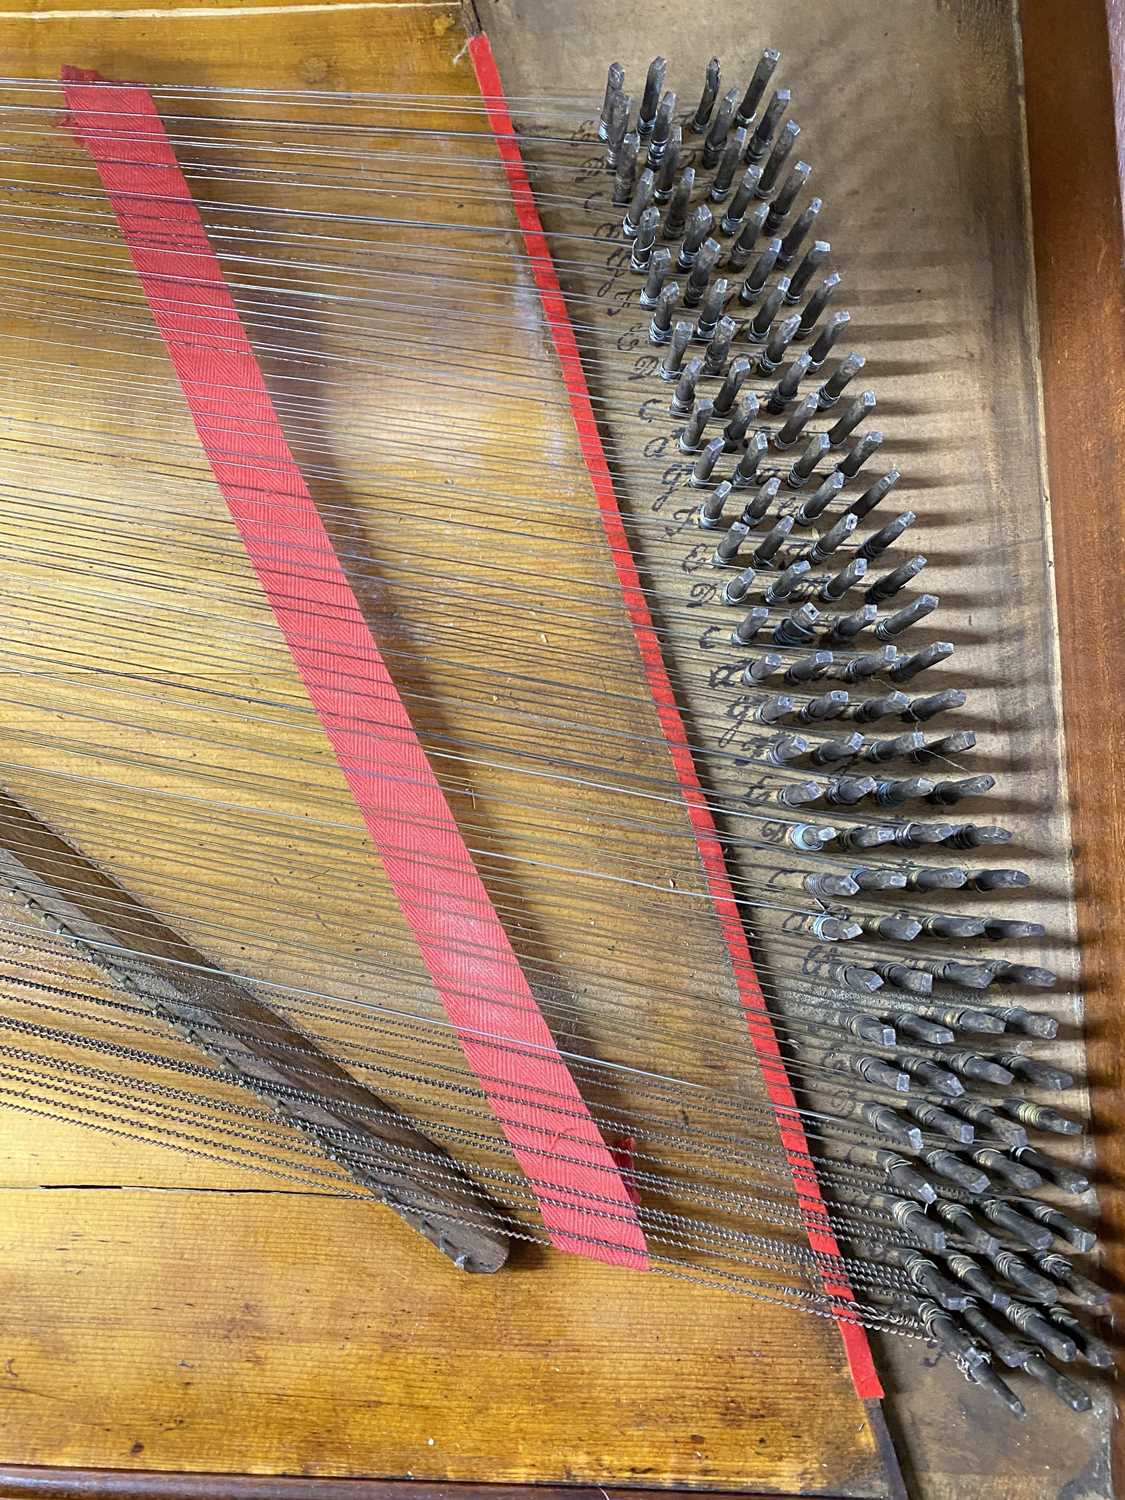 John Broadwood & Sons Makers, Great Putney Street, London, a 19th Century spinet or square piano set - Image 5 of 7